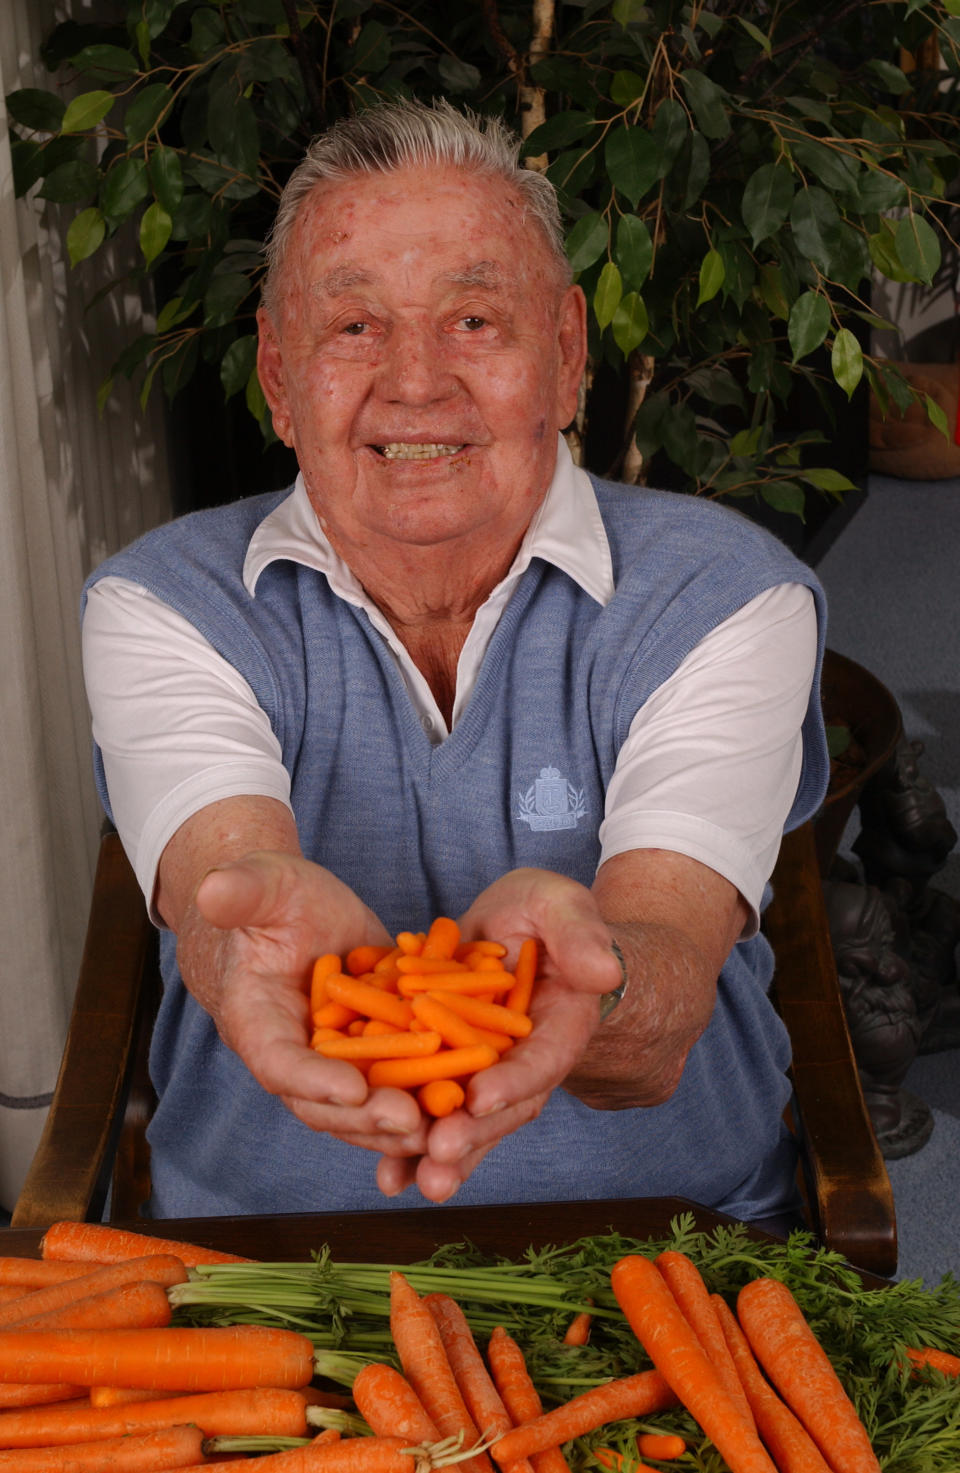 A man holding baby carrots